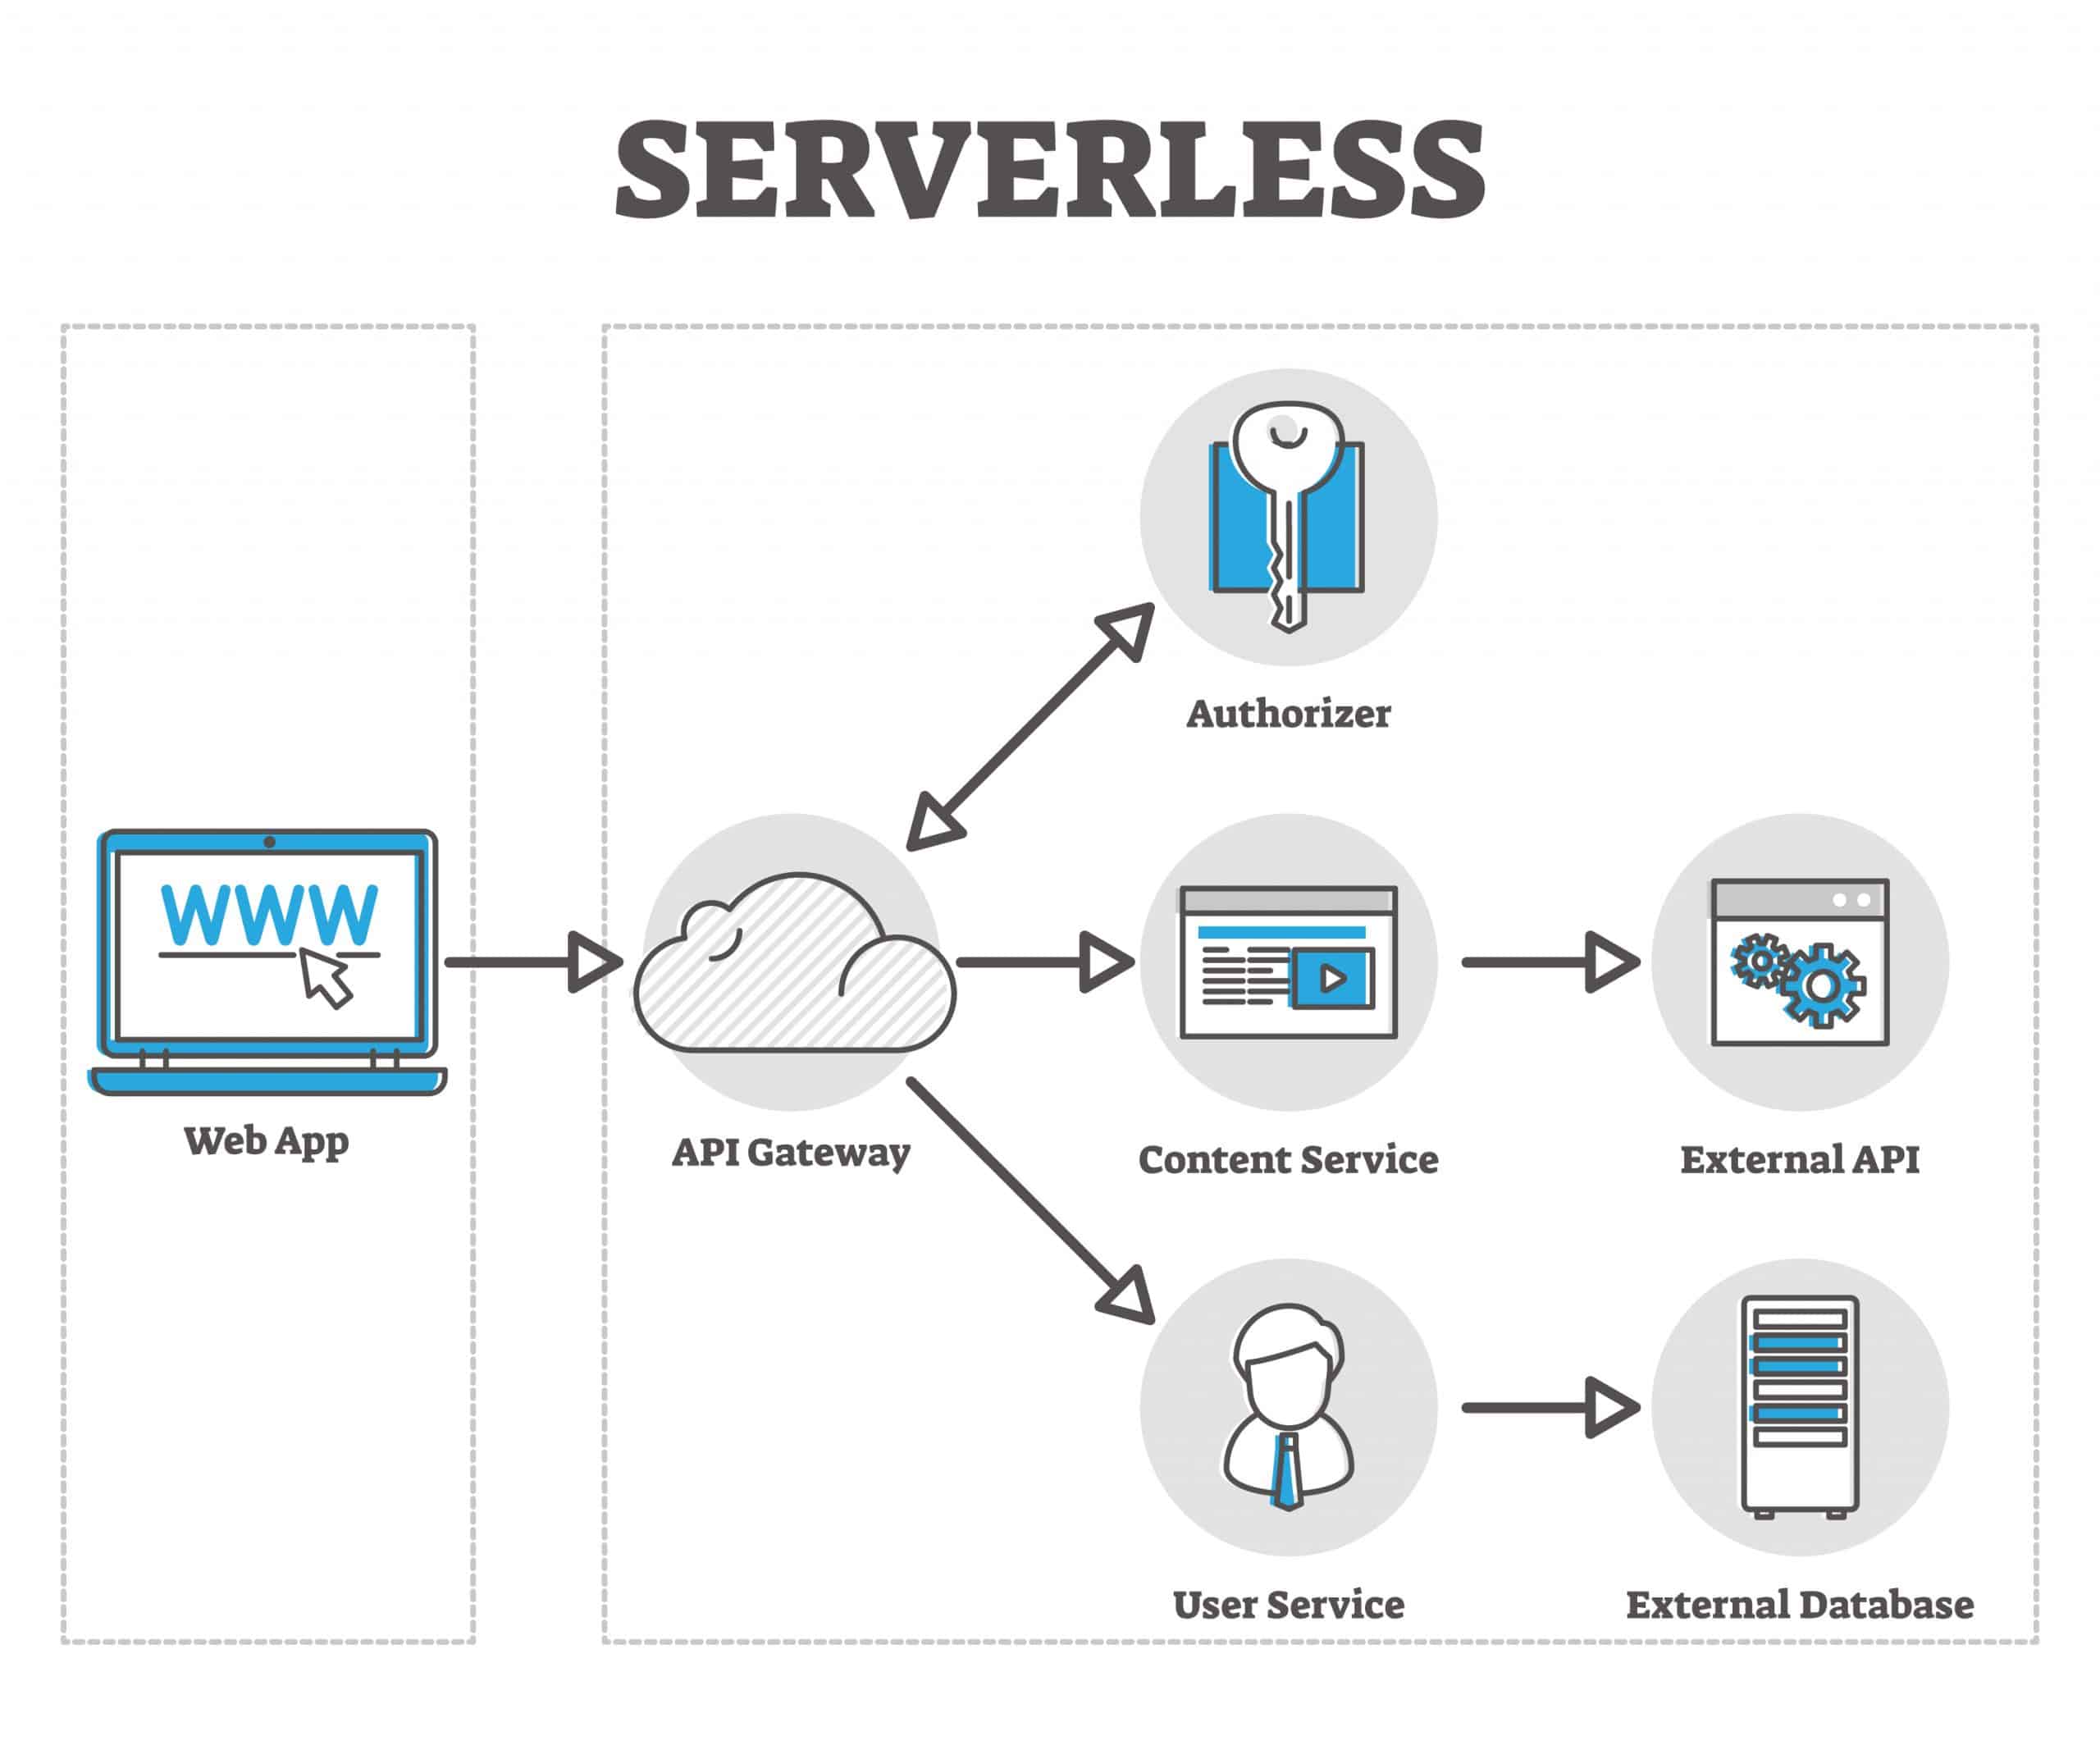 A diagram of serverless computing architecture shows how a web application interacts with an API gateway, which in turn interacts with a content service, user service, and external API, all of which are connected to an external database.